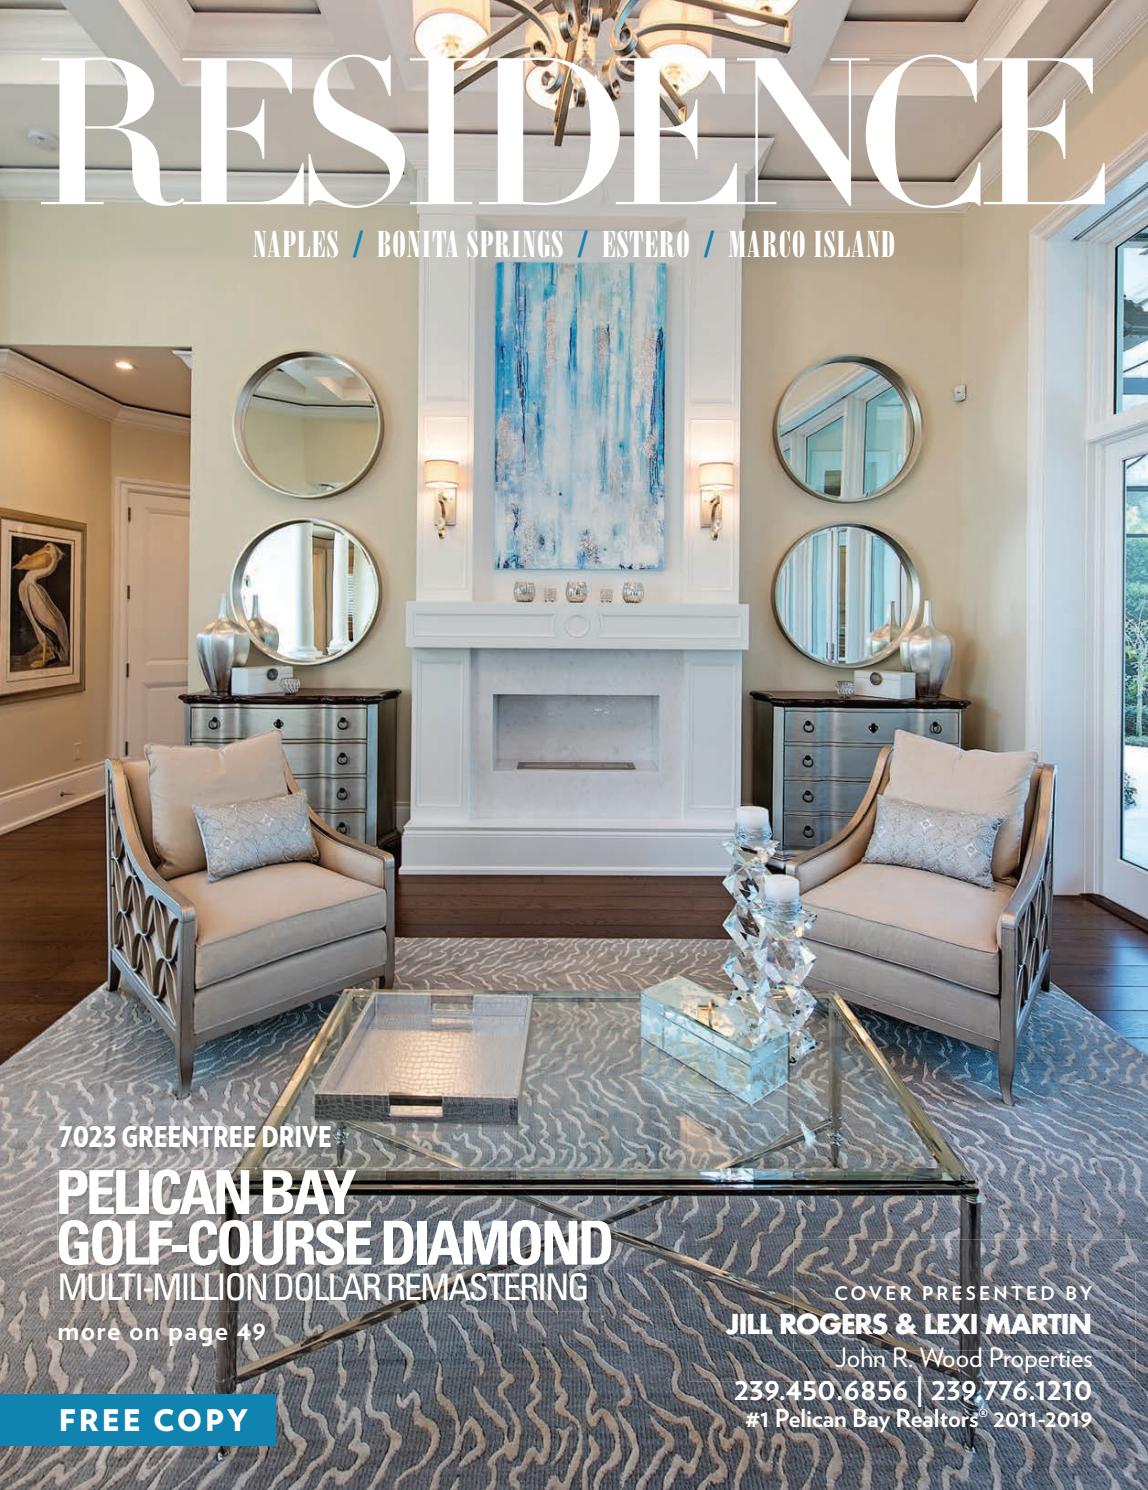 Fireplace Smells In the Summer Beautiful Residence Magazine